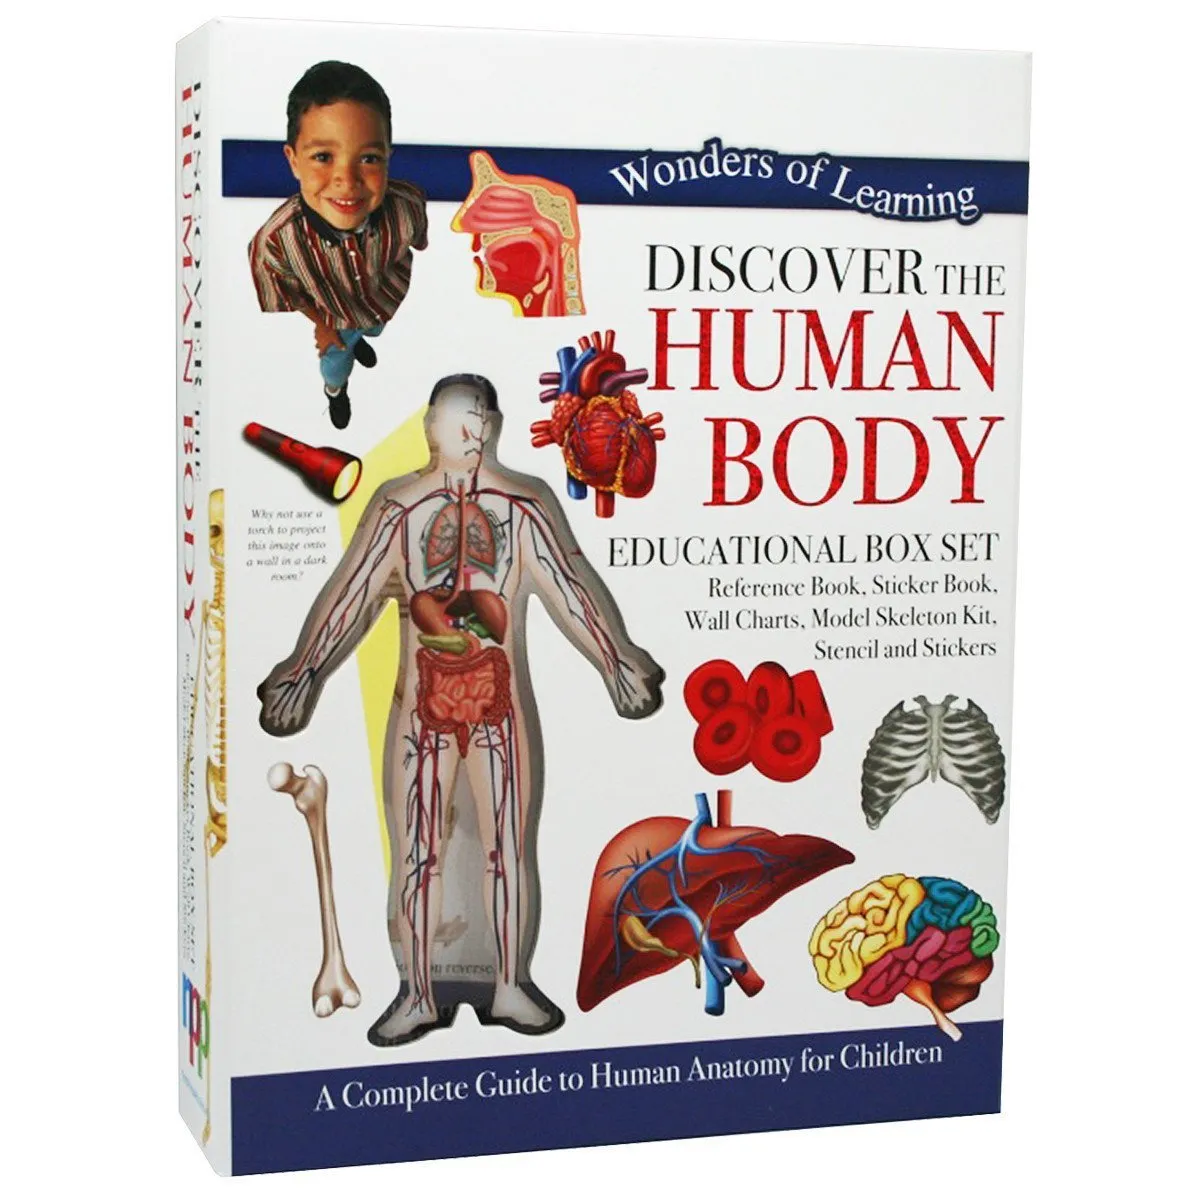 Wonders Of Learning Discover hUMAN BODY Educational Box Set
